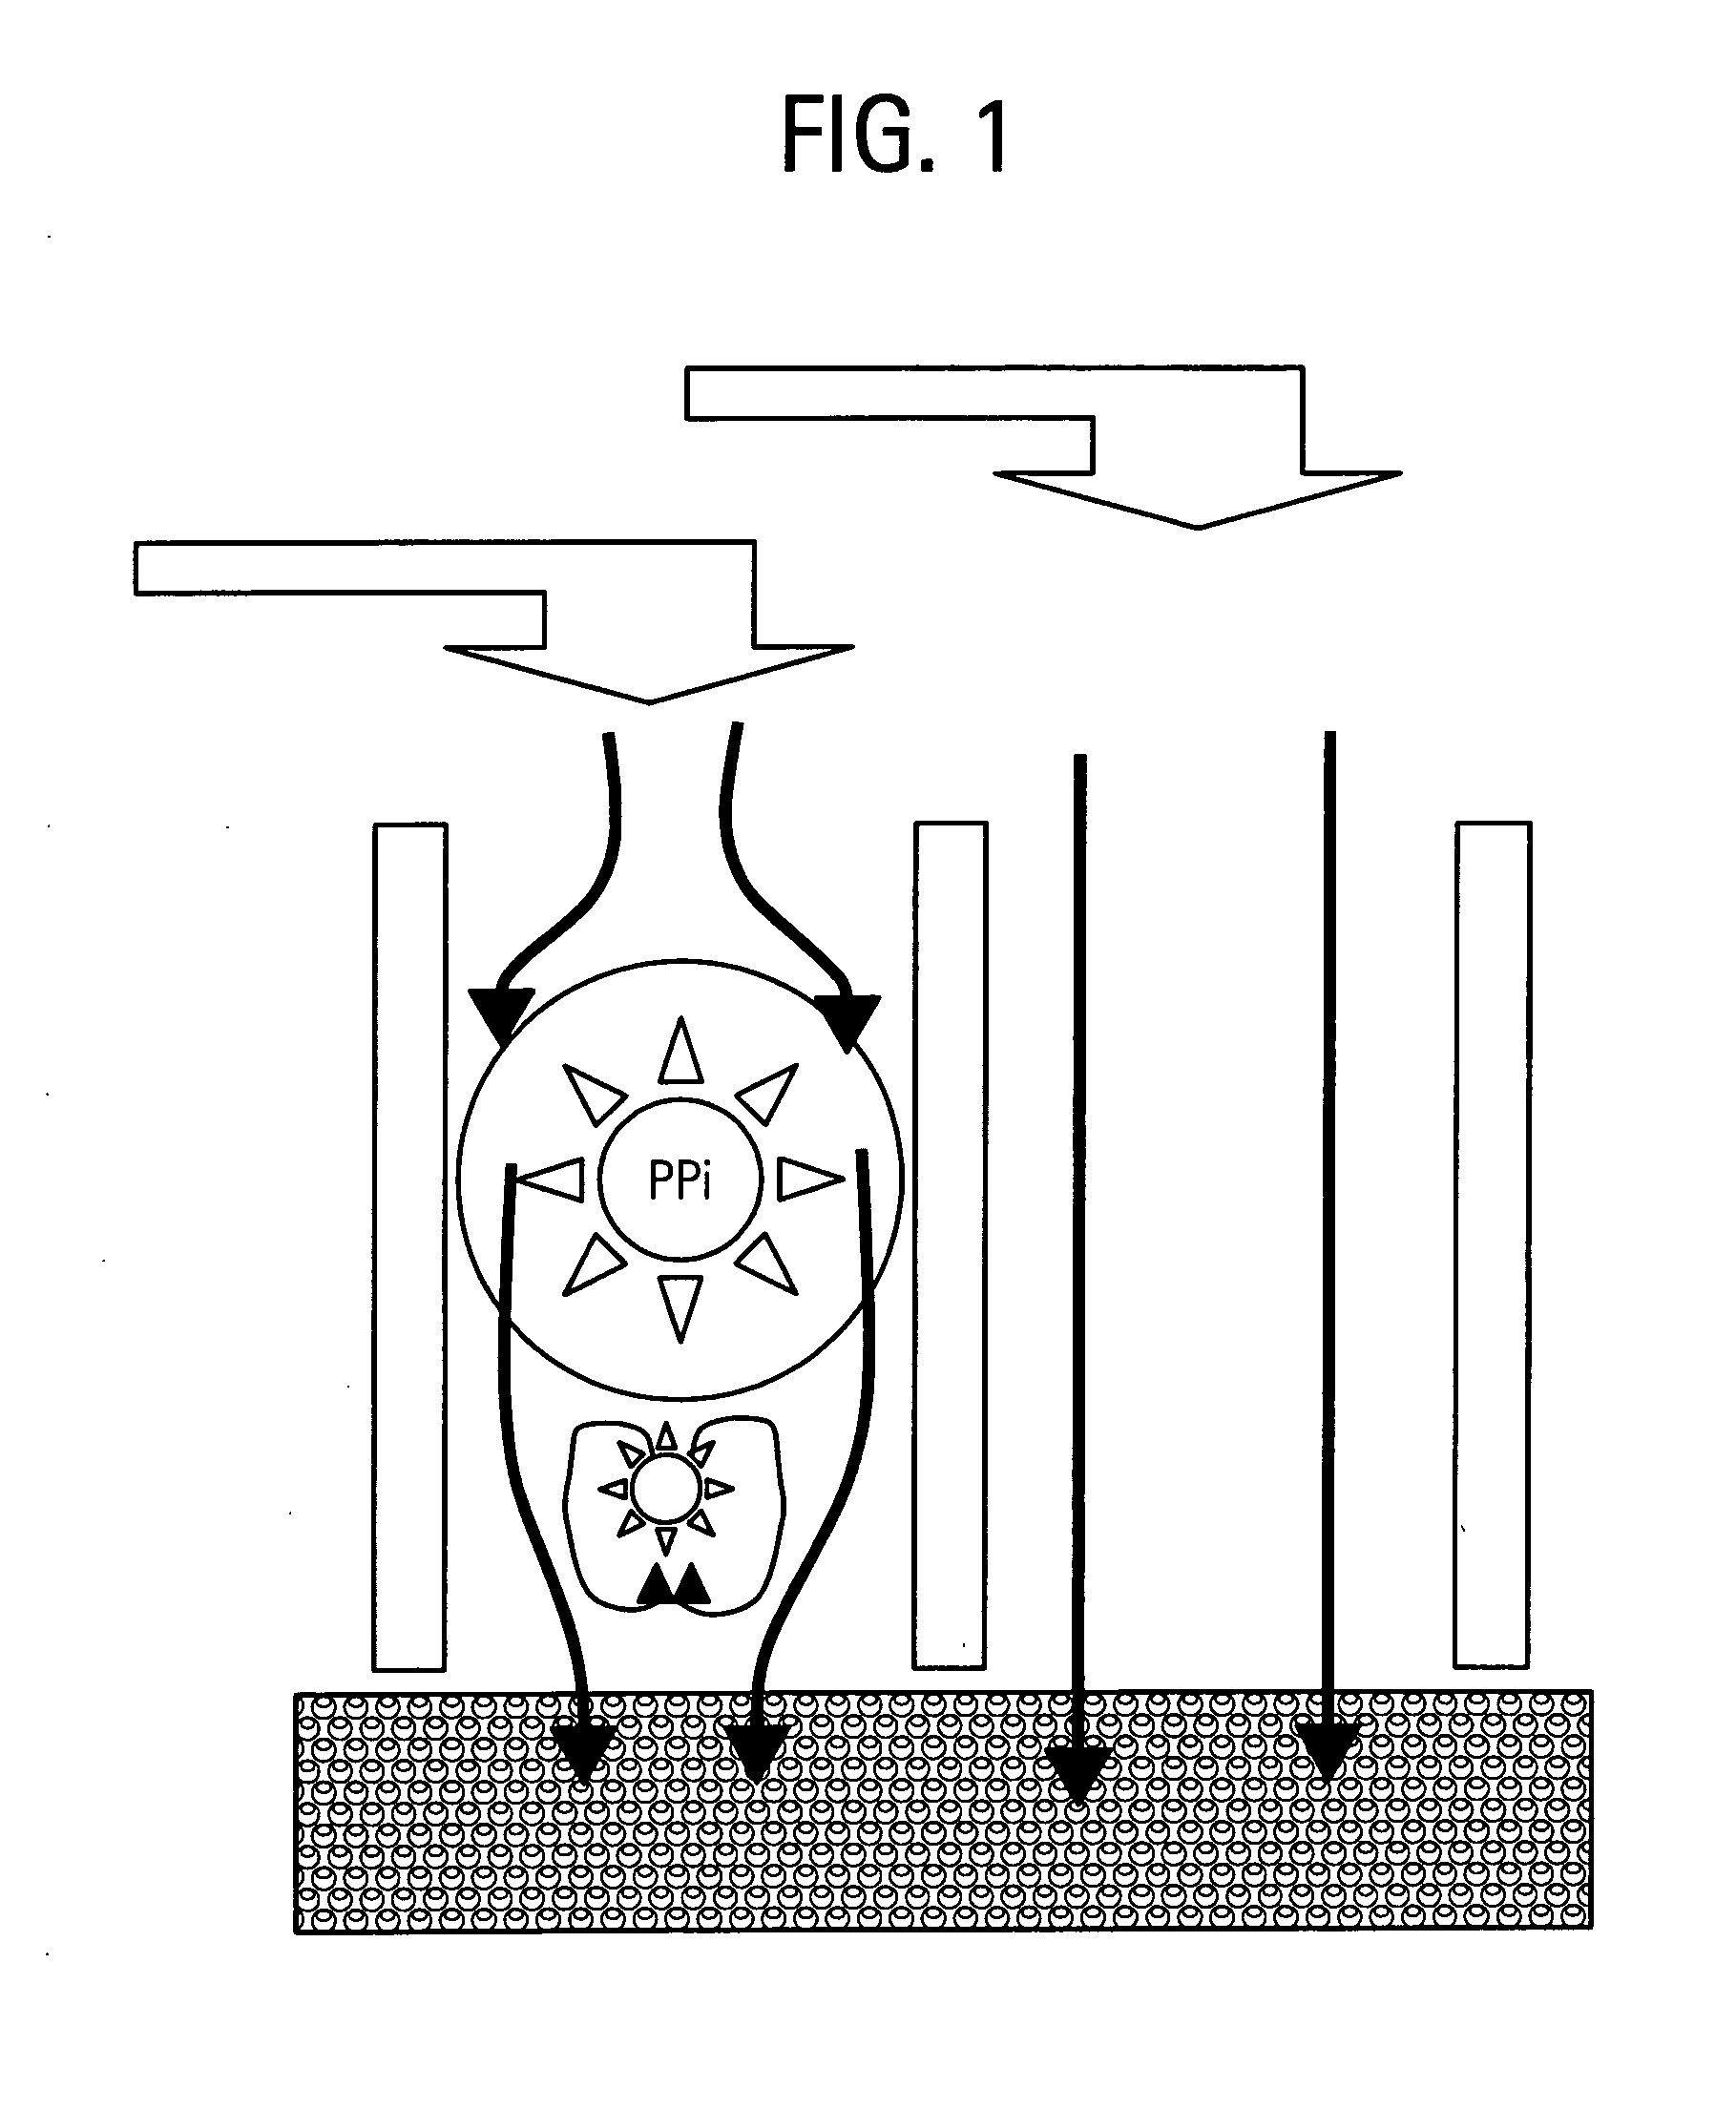 Method for isolation of independent, parallel chemical micro-reactions using a porous filter